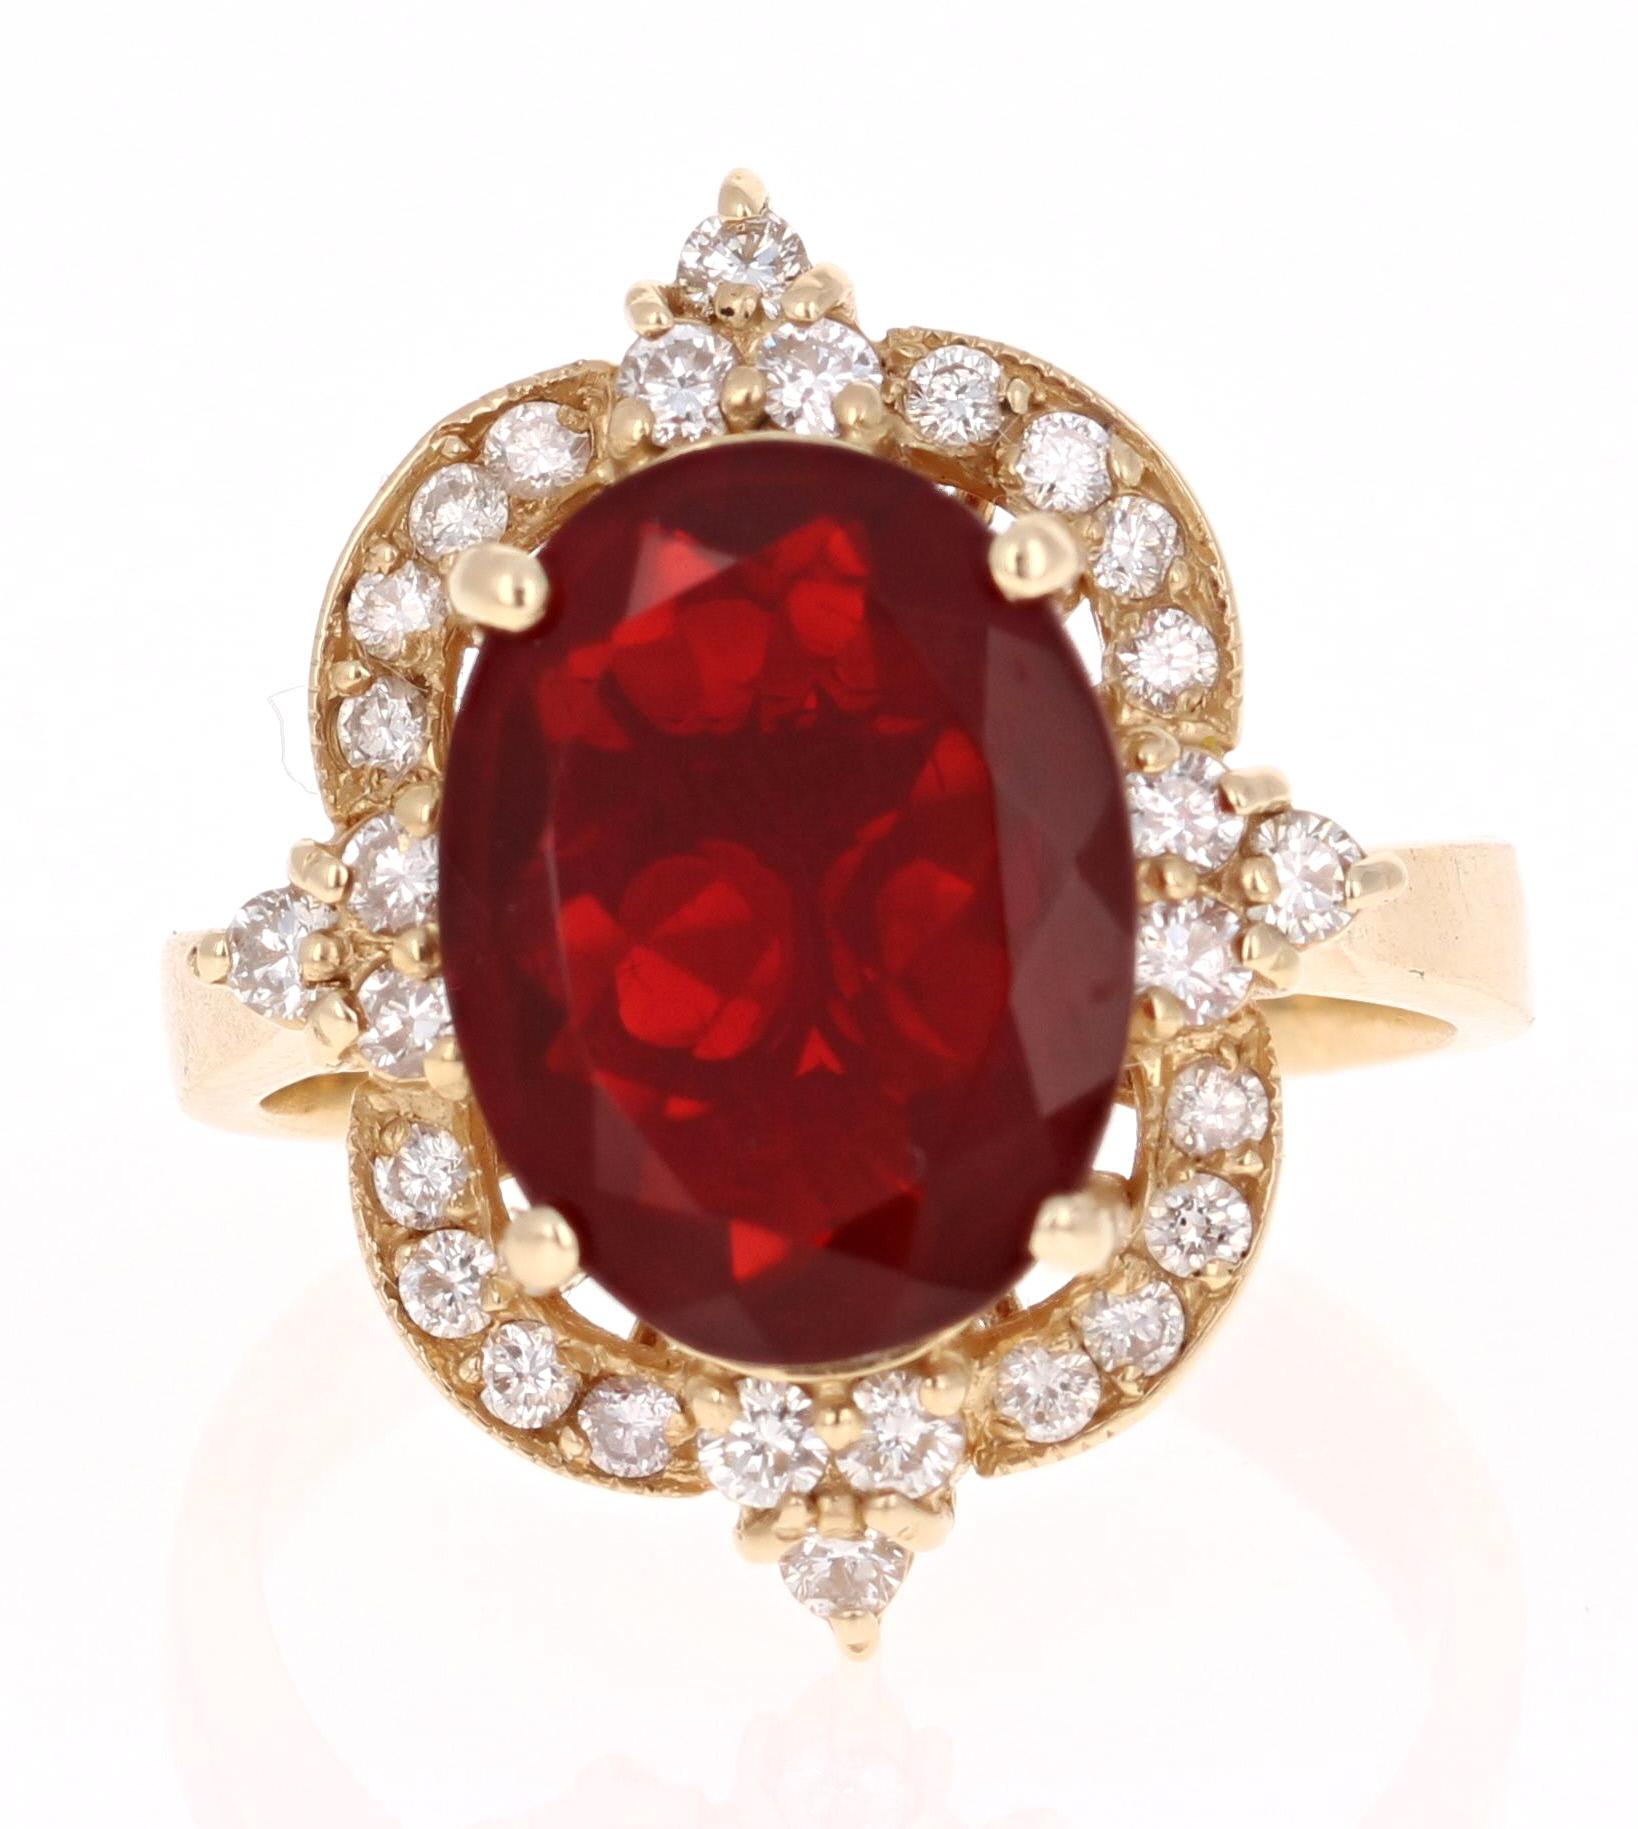 This gorgeous cocktail ring has a beautiful deep red Oval Cut Fire Opal that weighs 3.11 Carats and 28 Round Cut Diamonds that weigh 0.54 Carats. The clarity and color of the diamonds are VS-H.  The total carat weight of the ring is 3.65 cts.  

It